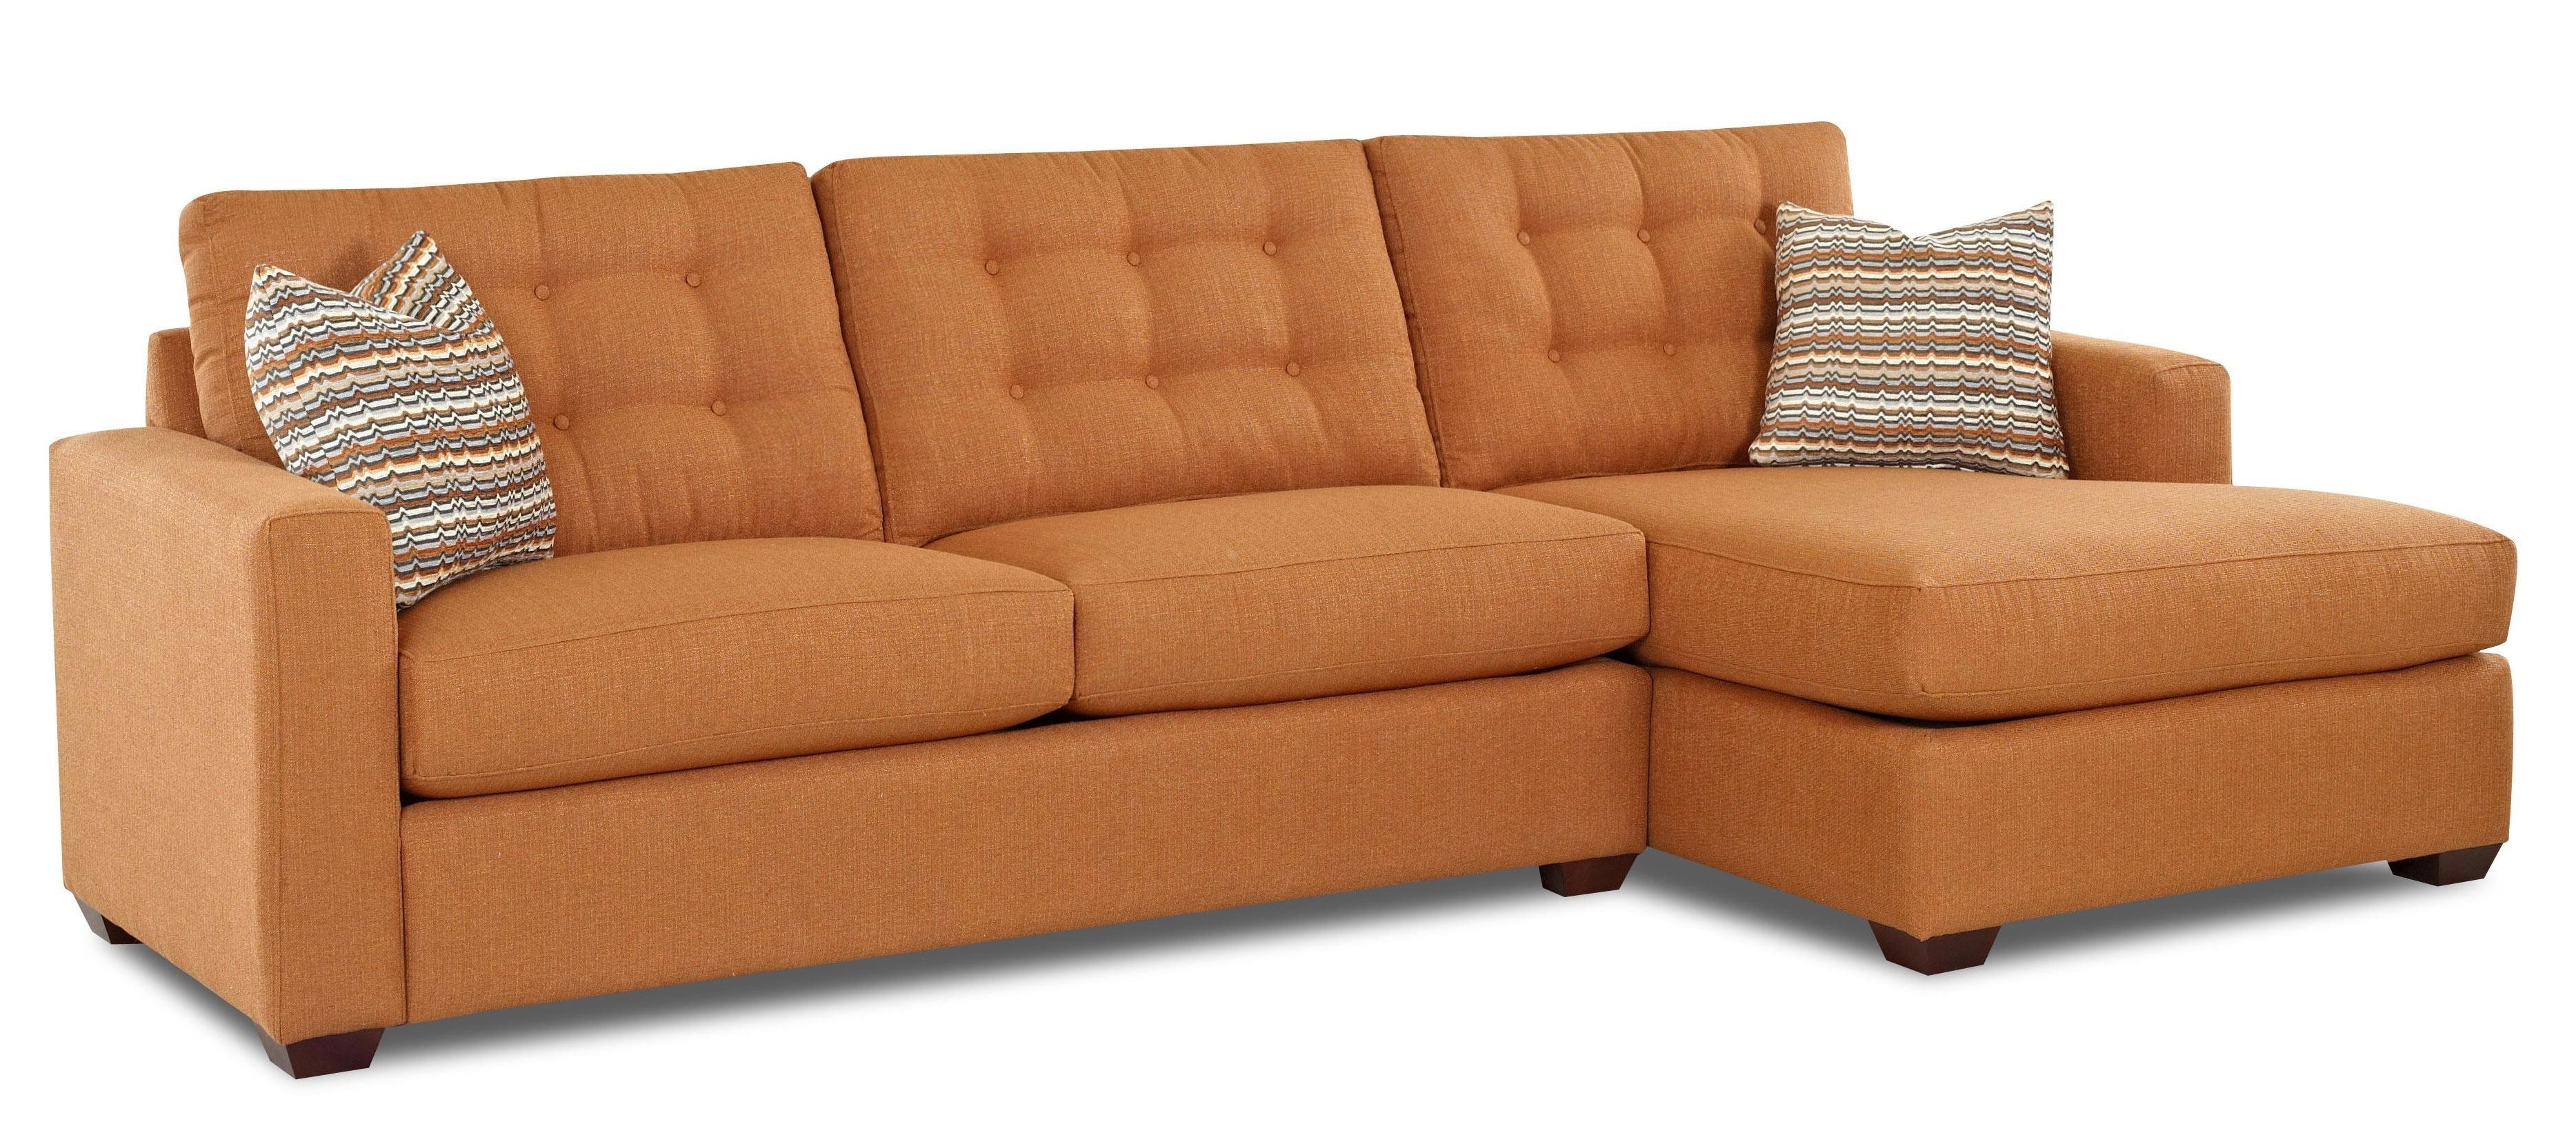 Chaise Lounge Couches Throughout Latest Chaise Lounge Sofa Diy – Chaise Lounge Sofa, History And Function (View 8 of 15)